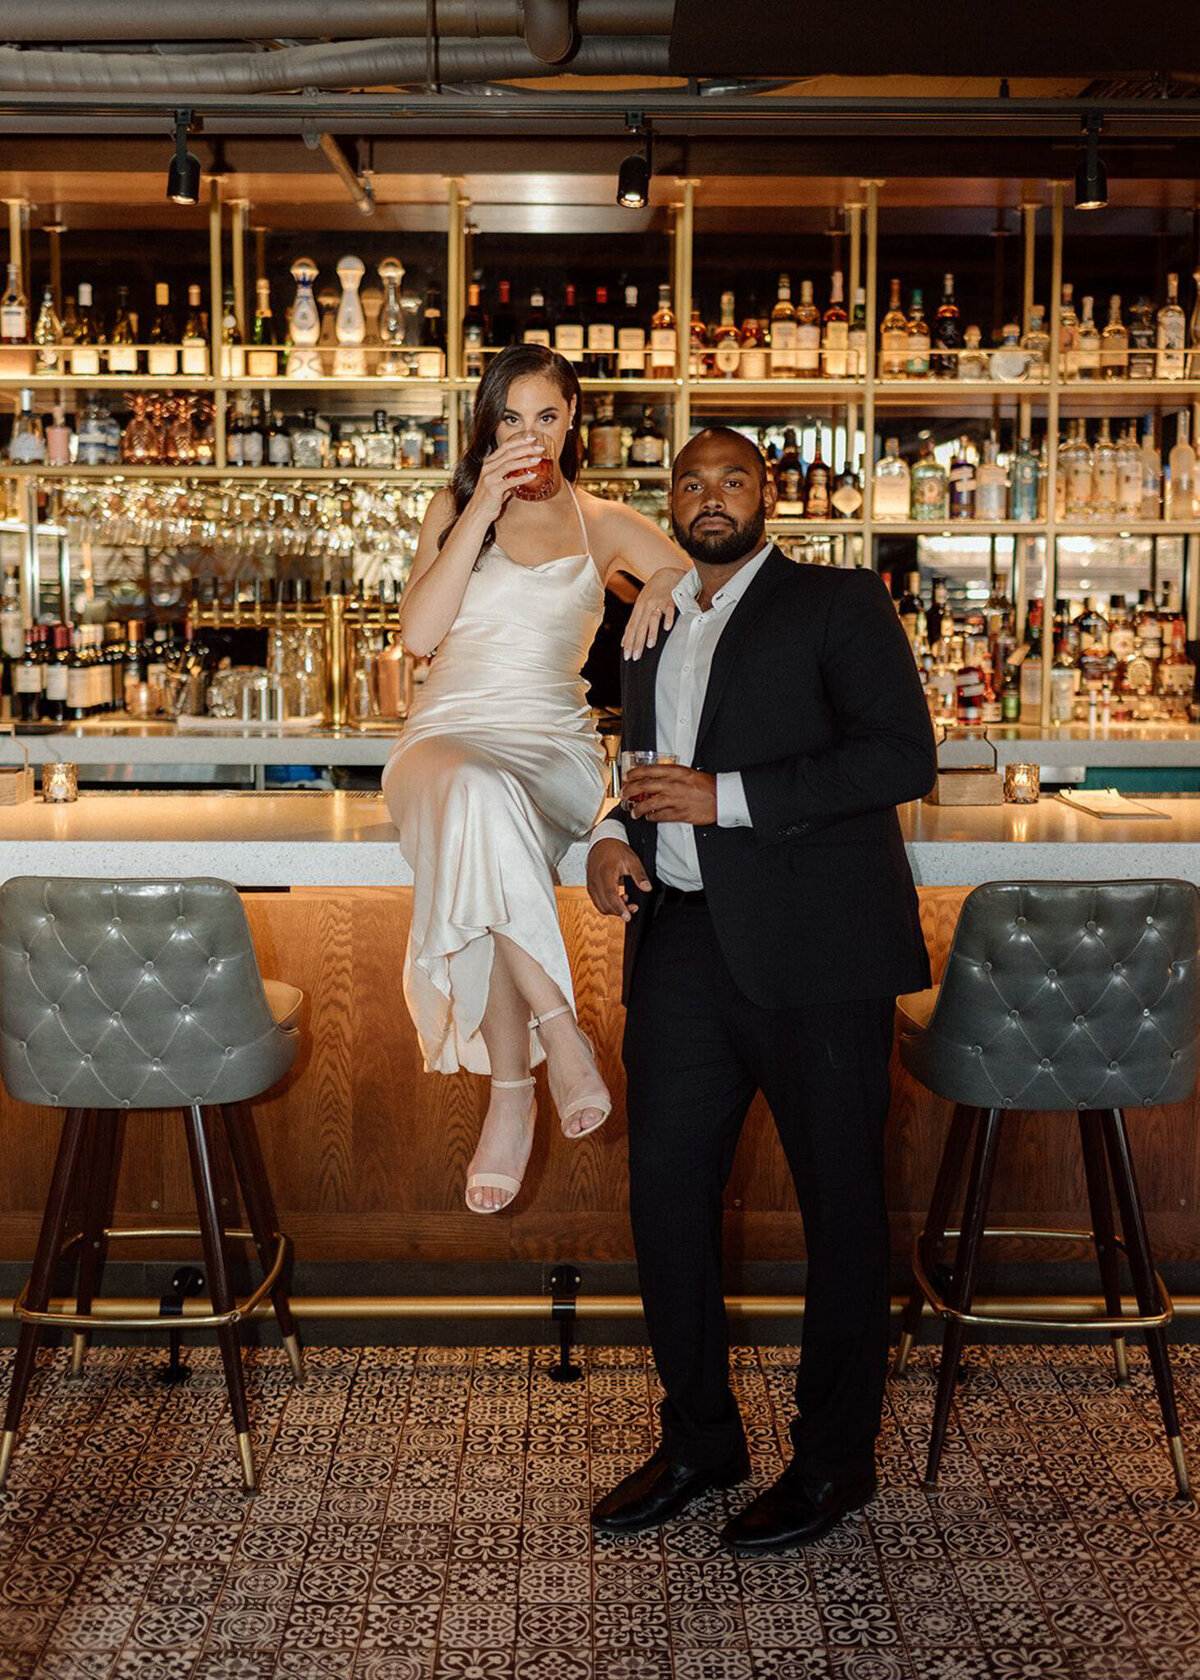 Trendy and modern wedding portrait of a couple at a bar inspiration by Bronte Taylor Photography, is a Vancouver-based photographer with a playful, genuine and intimate approach.